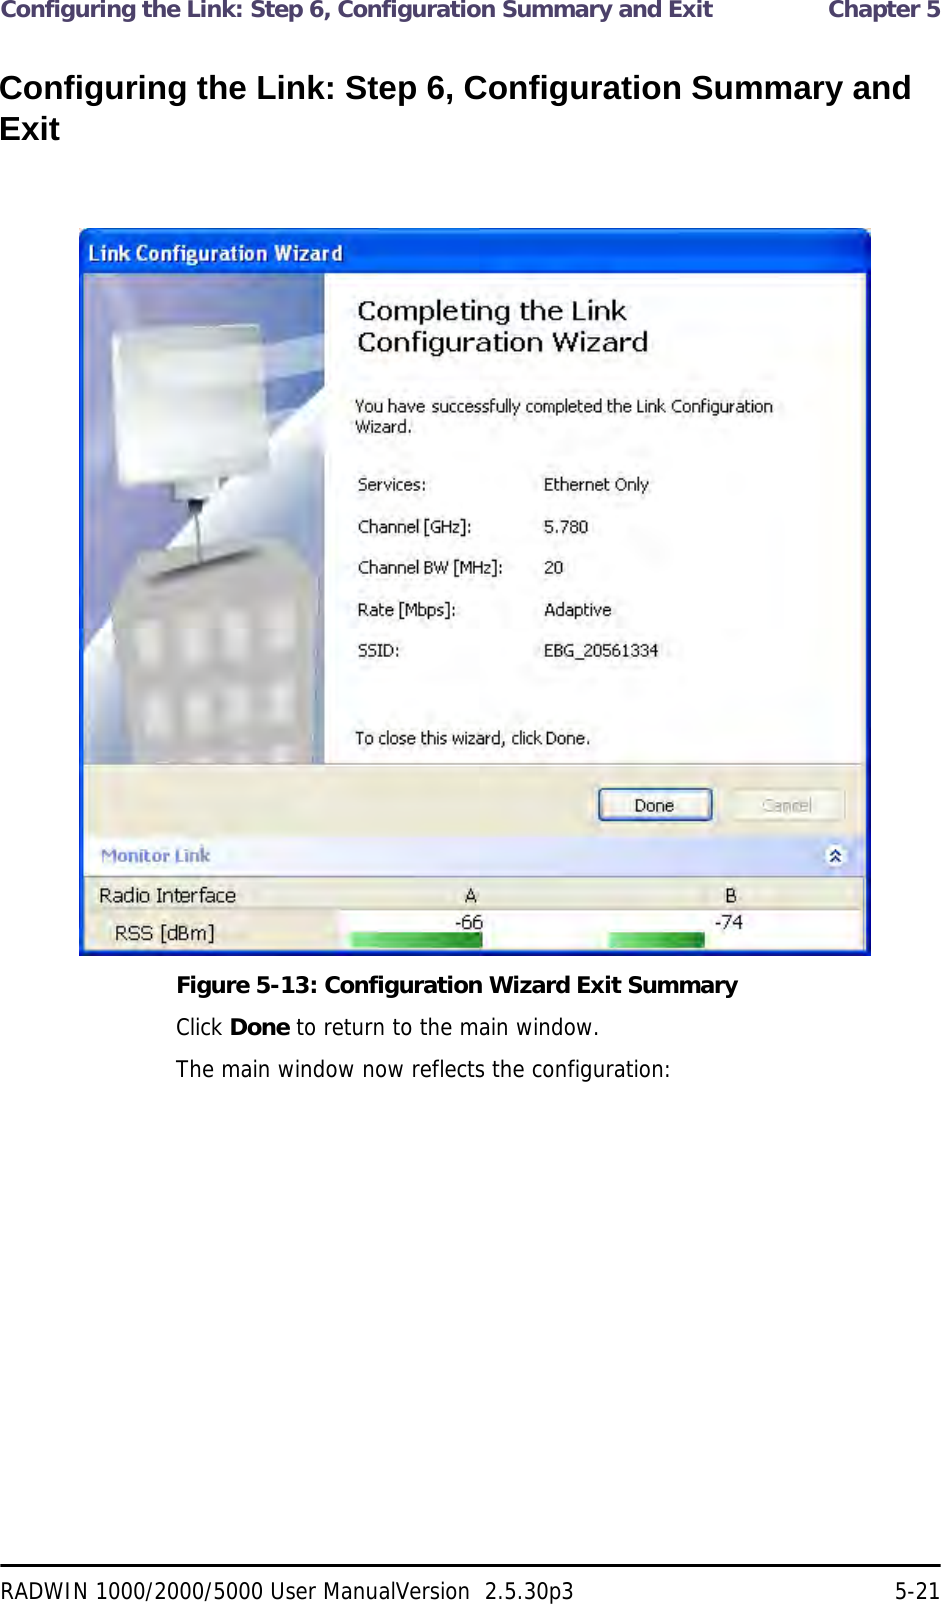 Configuring the Link: Step 6, Configuration Summary and Exit  Chapter 5RADWIN 1000/2000/5000 User ManualVersion  2.5.30p3 5-21Configuring the Link: Step 6, Configuration Summary and ExitFigure 5-13: Configuration Wizard Exit Summary Click Done to return to the main window.The main window now reflects the configuration: